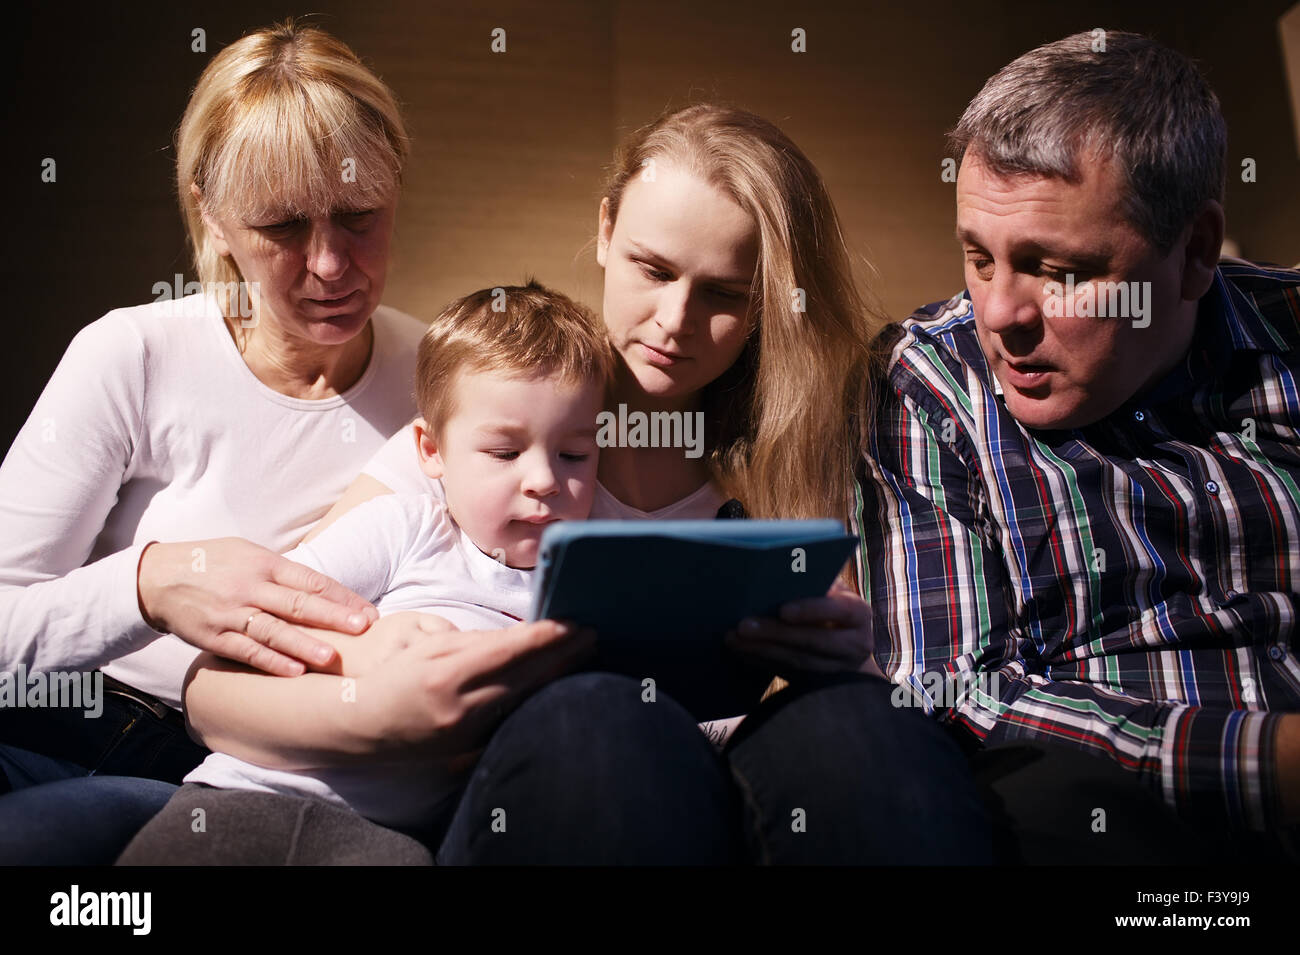 Family watching boy playing game on touchpad Stock Photo